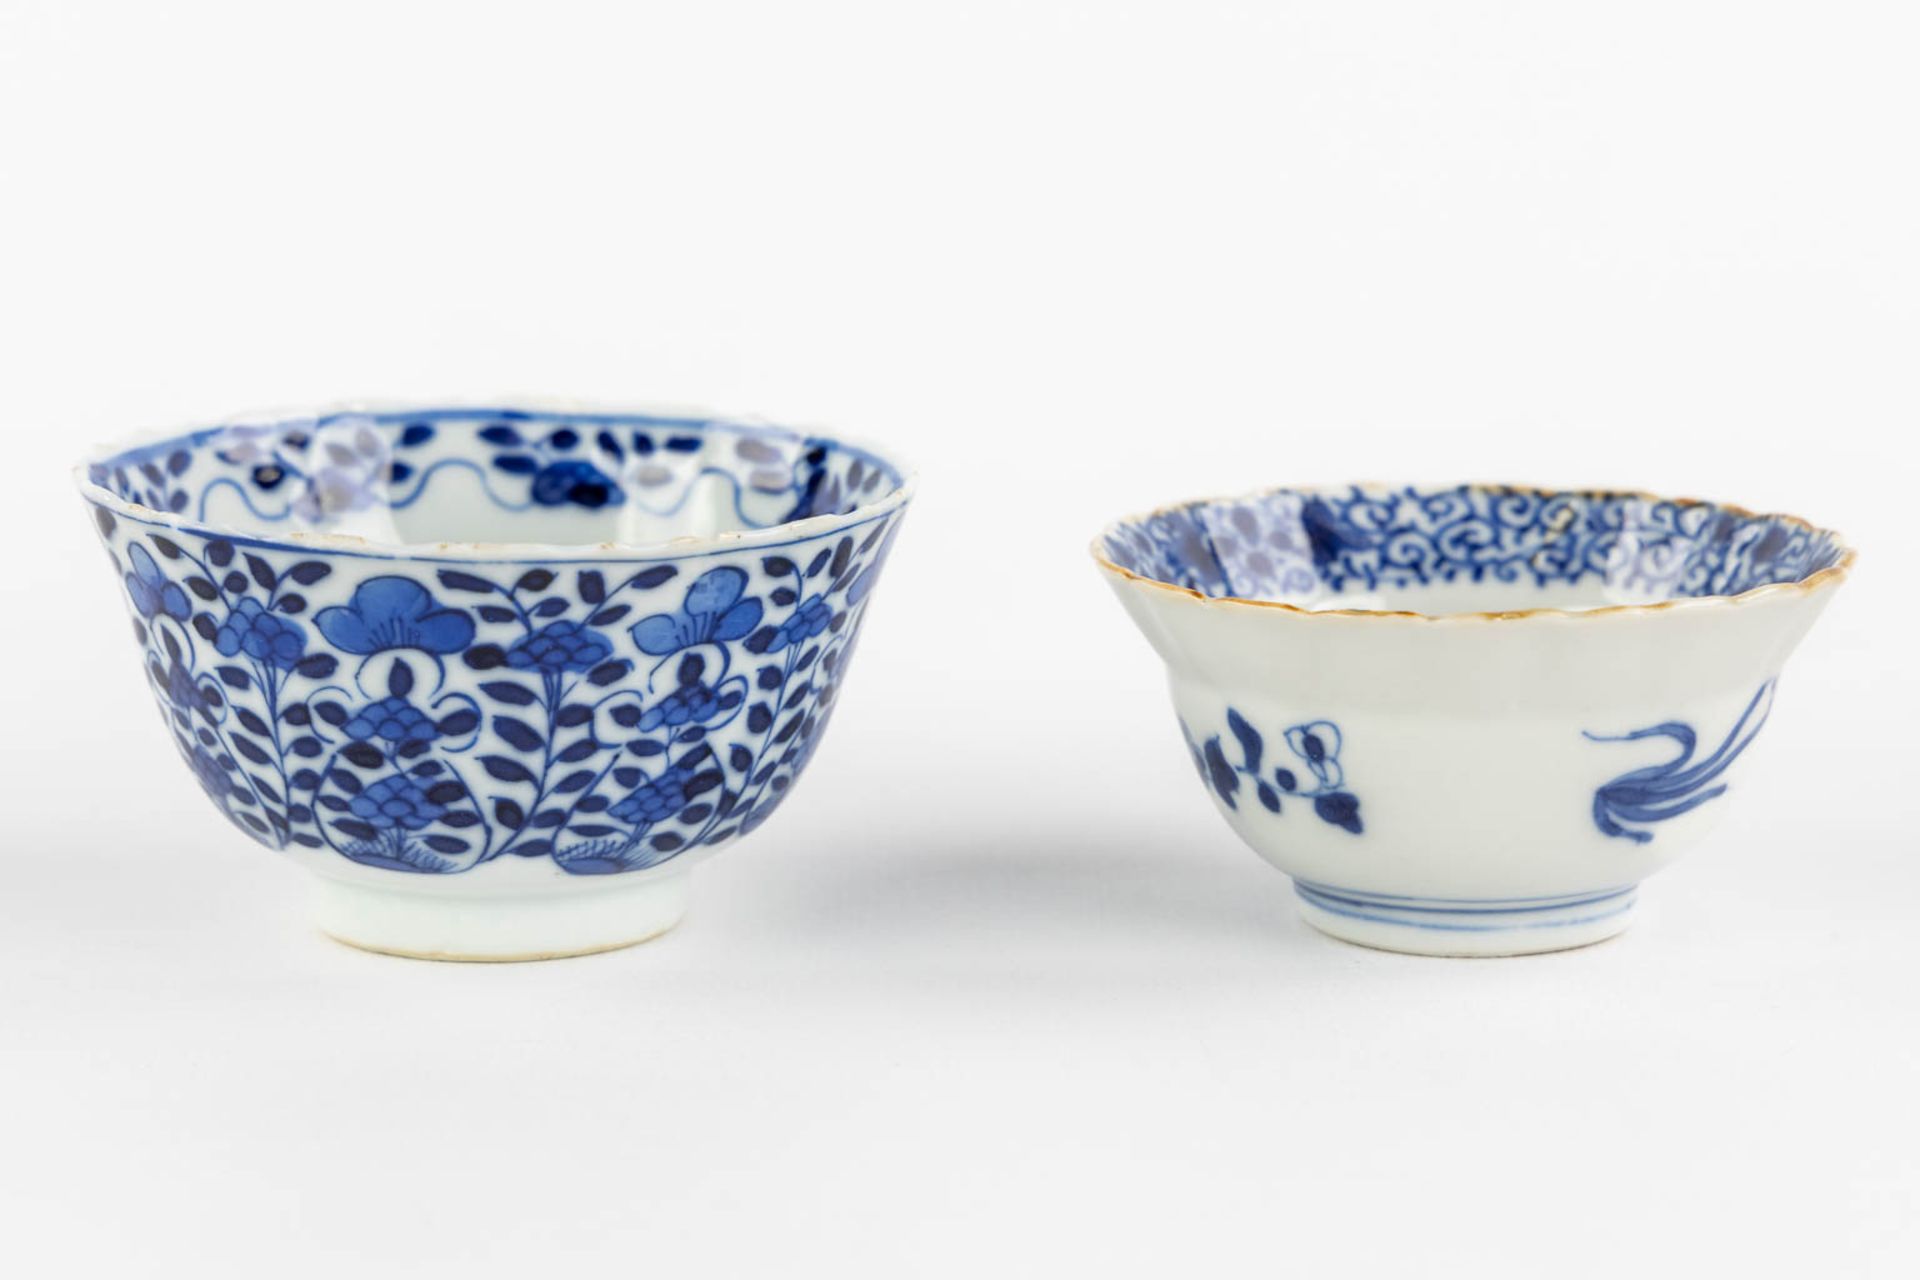 A pair of Chinese plate, blue-white decor of 'Fish and Crab', 19th C. (D:13,5 cm) - Image 5 of 9